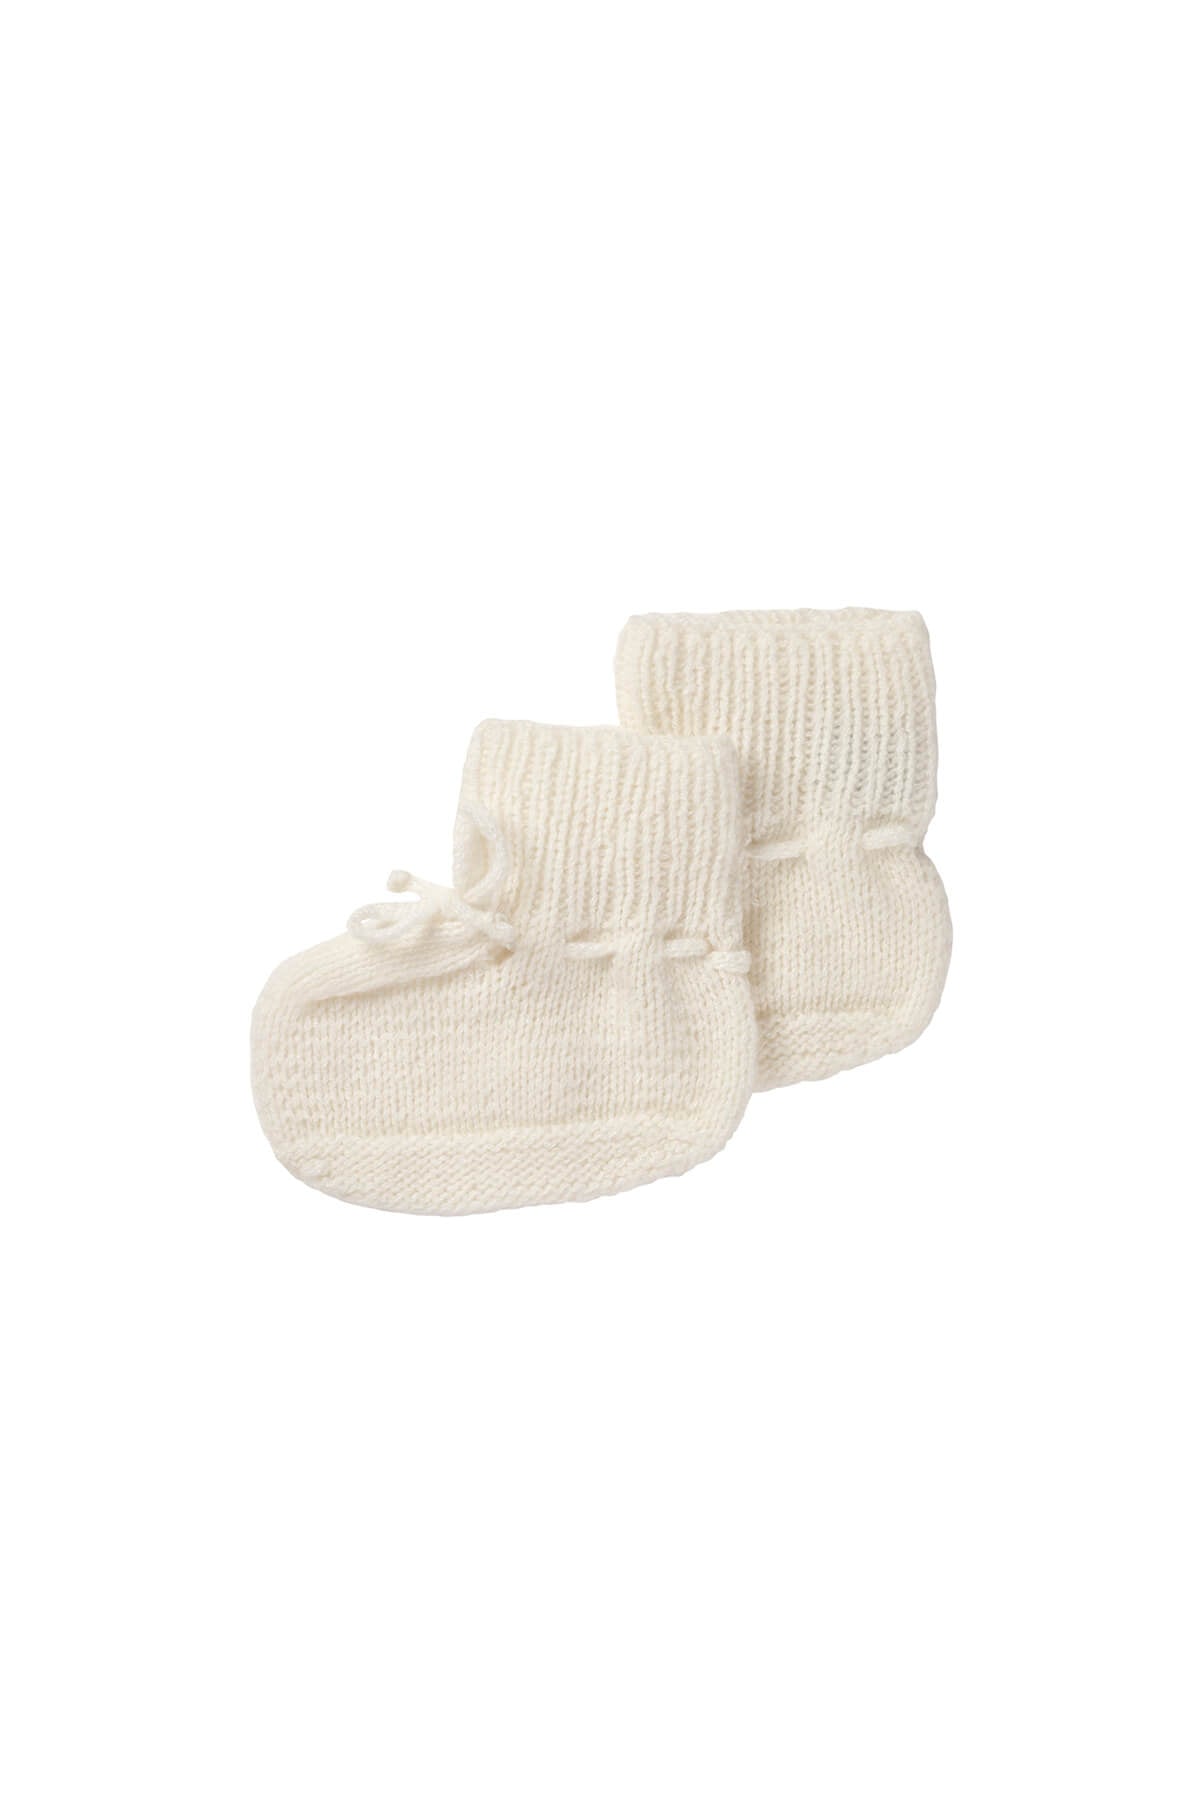 Johnstons of Elgin Hand Knitted Cashmere Baby Booties in Ecru on white background 61711SA0132ONE